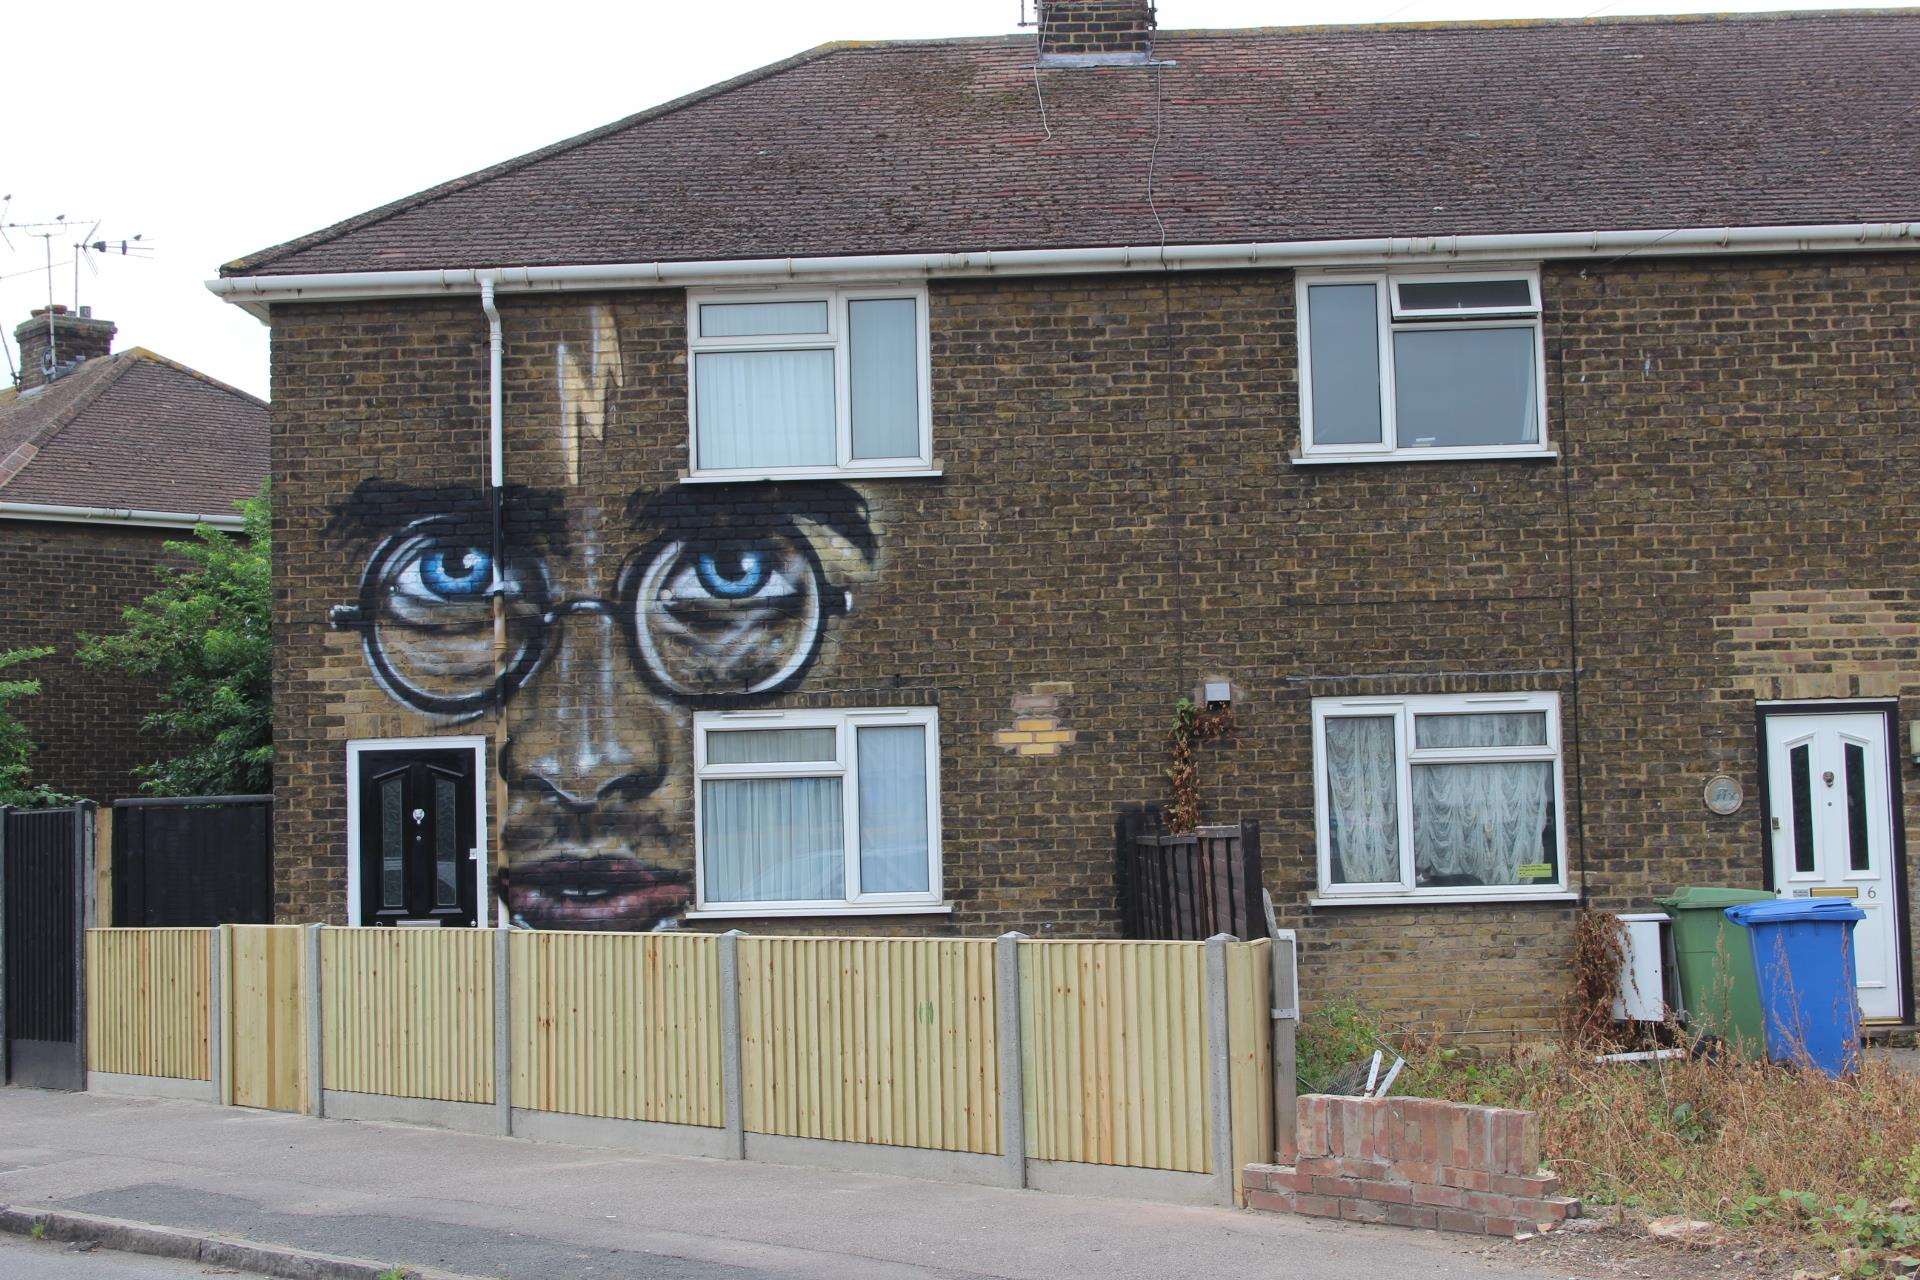 Denise Kerry's home after being transformed into Harry Potter by muralist Jules Muck